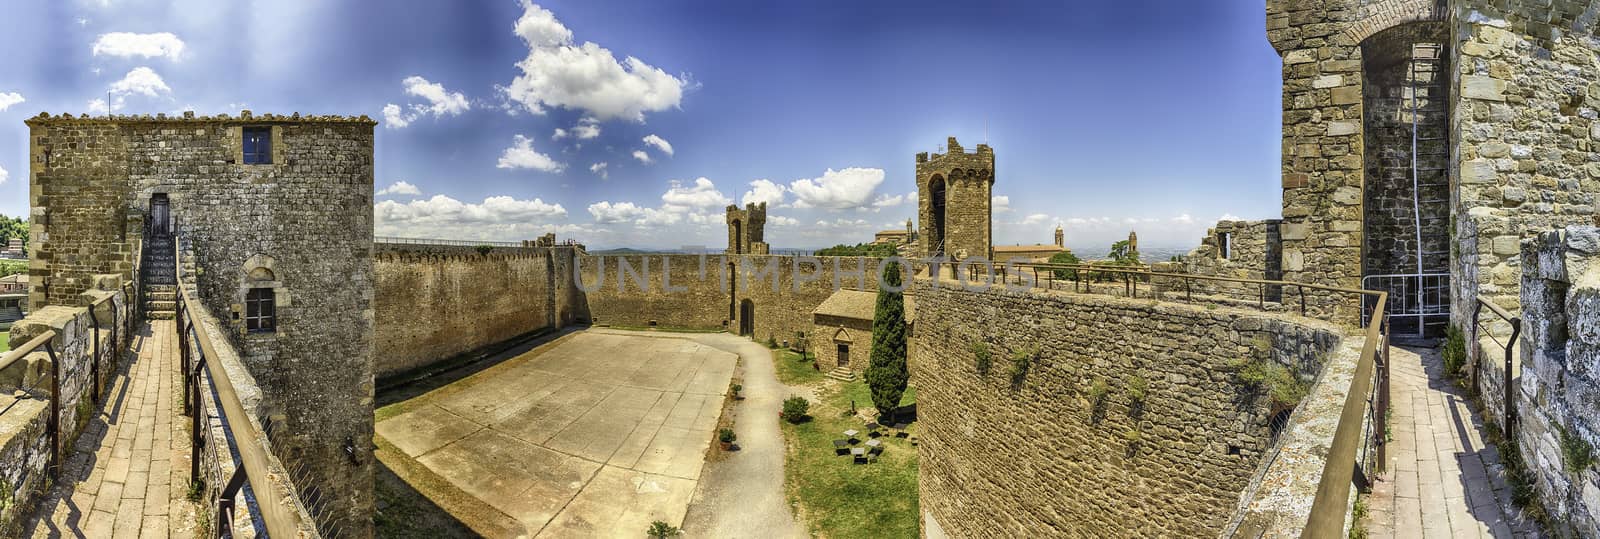 Interior panoramic view of a medieval italian fortress, iconic landmark and one of the most visited sightseeing in Montalcino, Tuscany, Italy